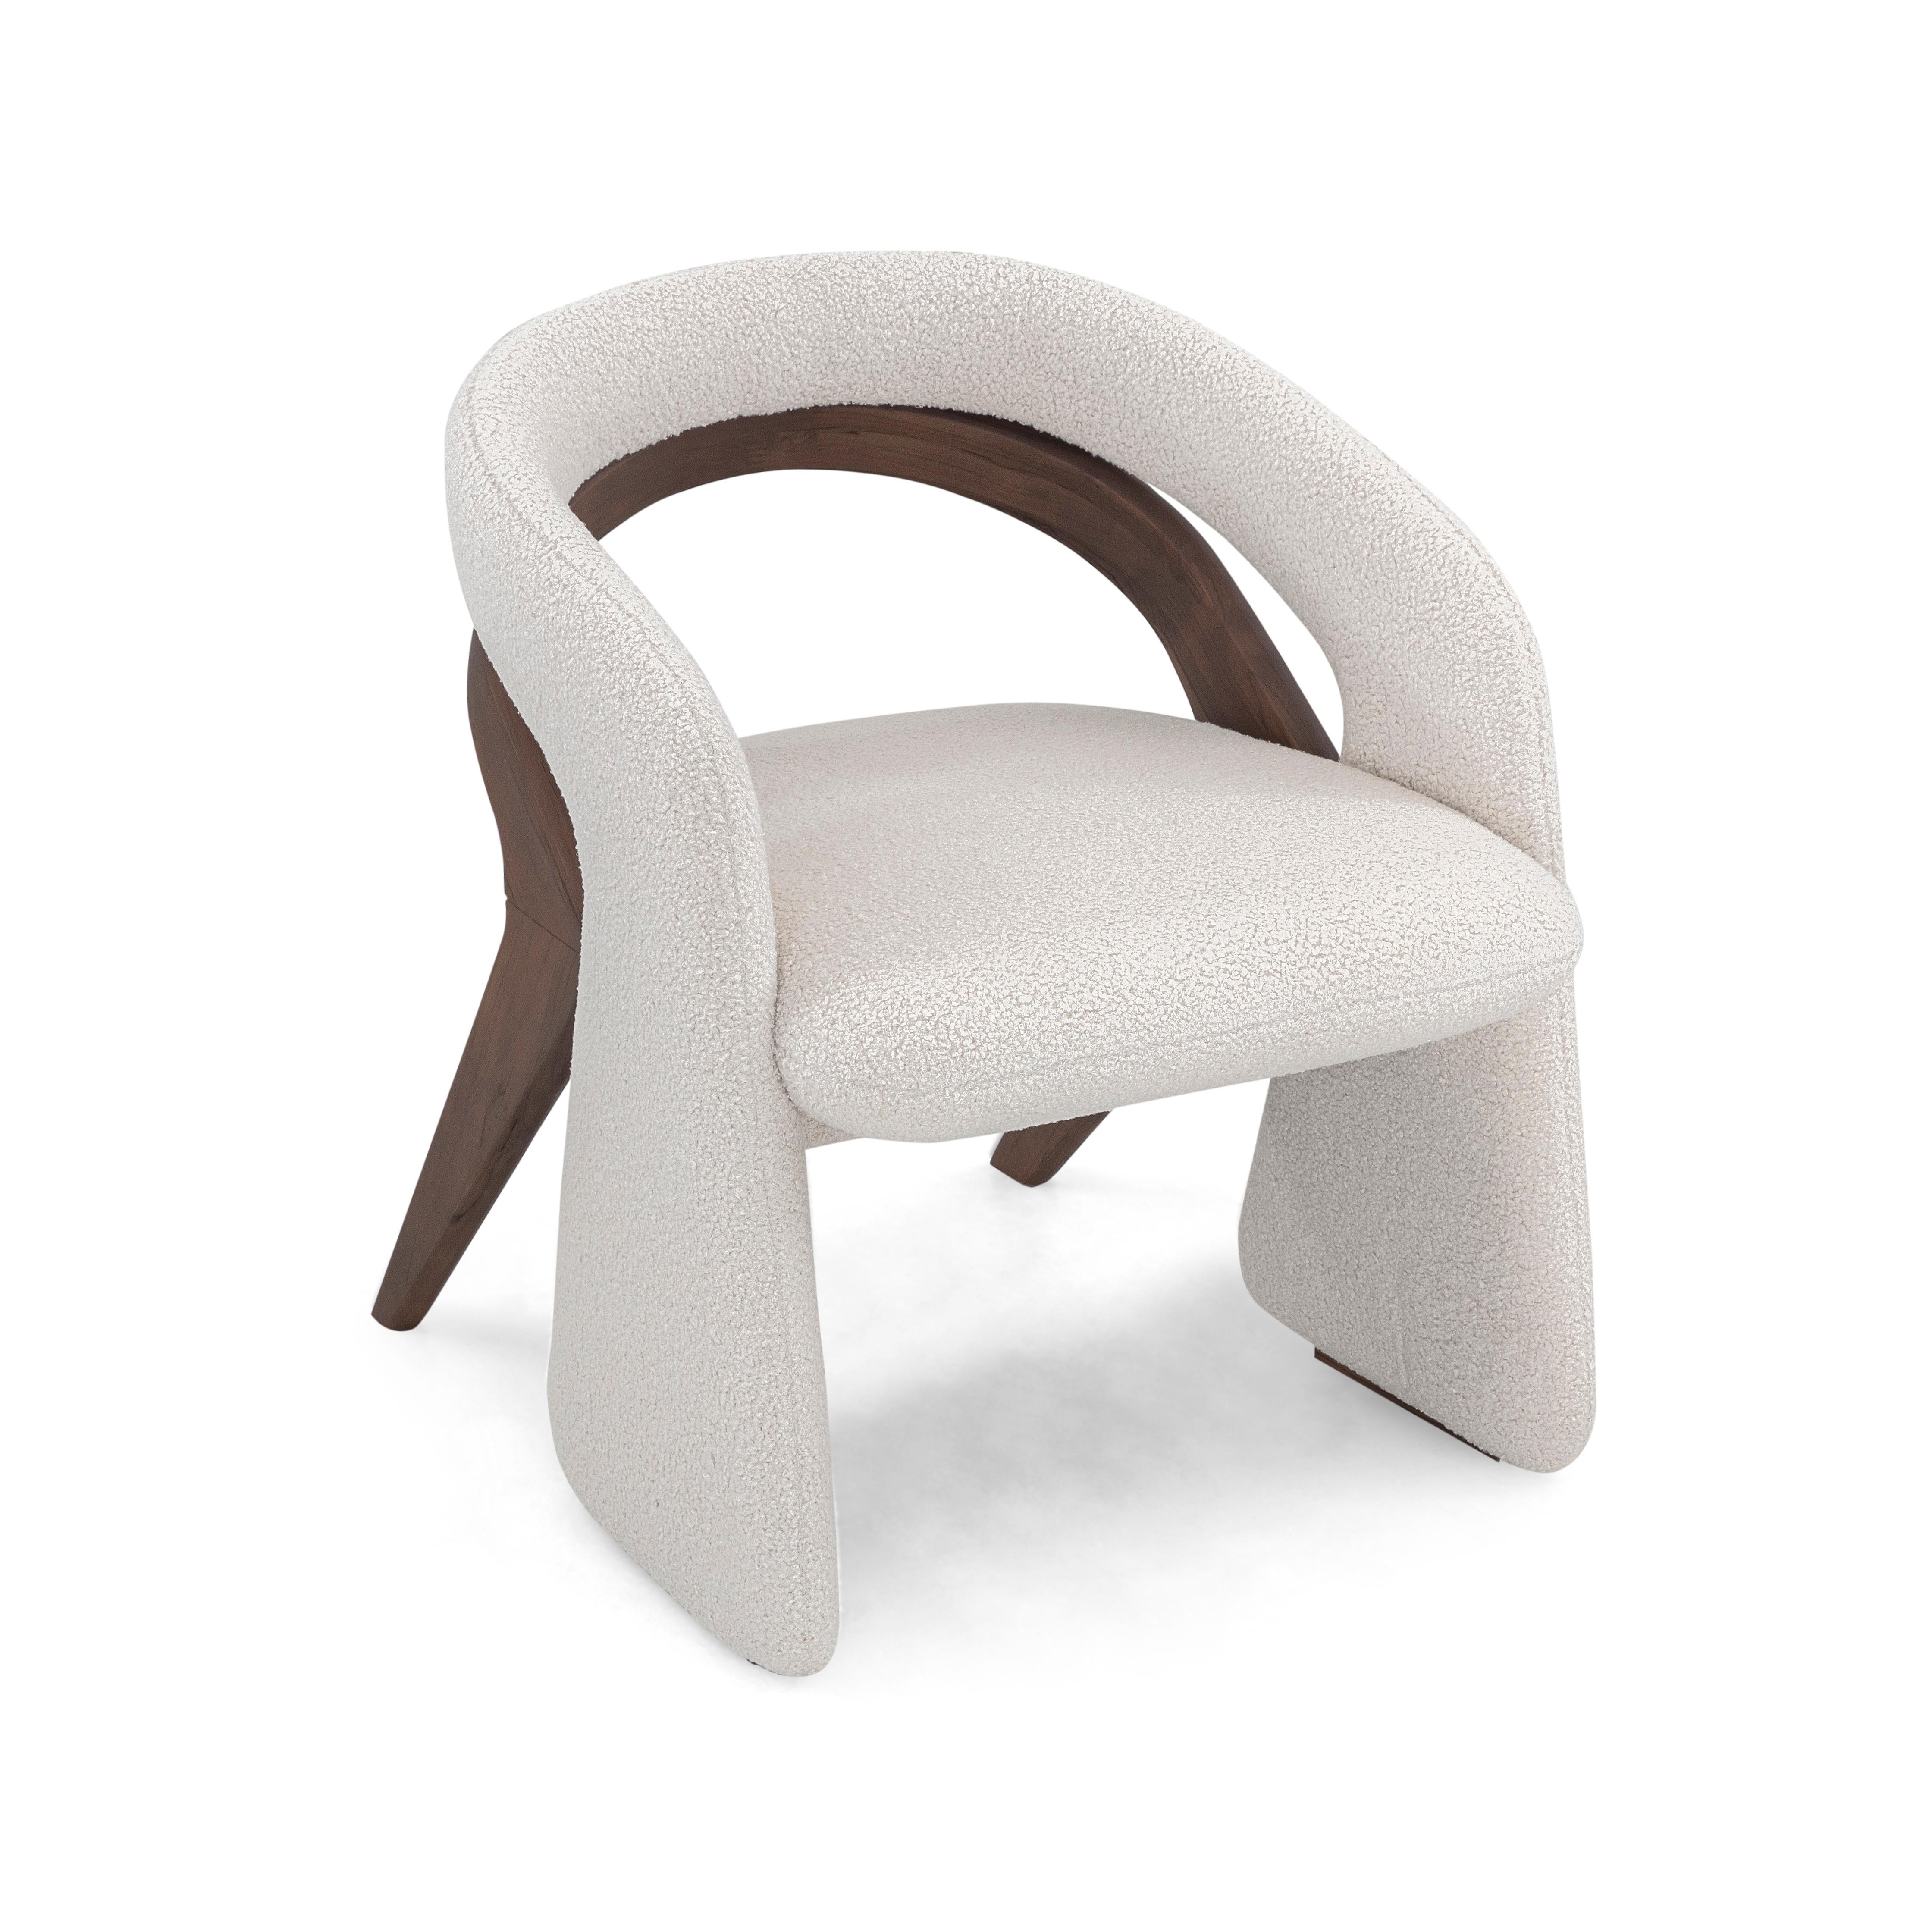 Scandinavian Modern Olga Contemporary Dining Chair in Walnut Wood Finish and White Boucle Fabric For Sale